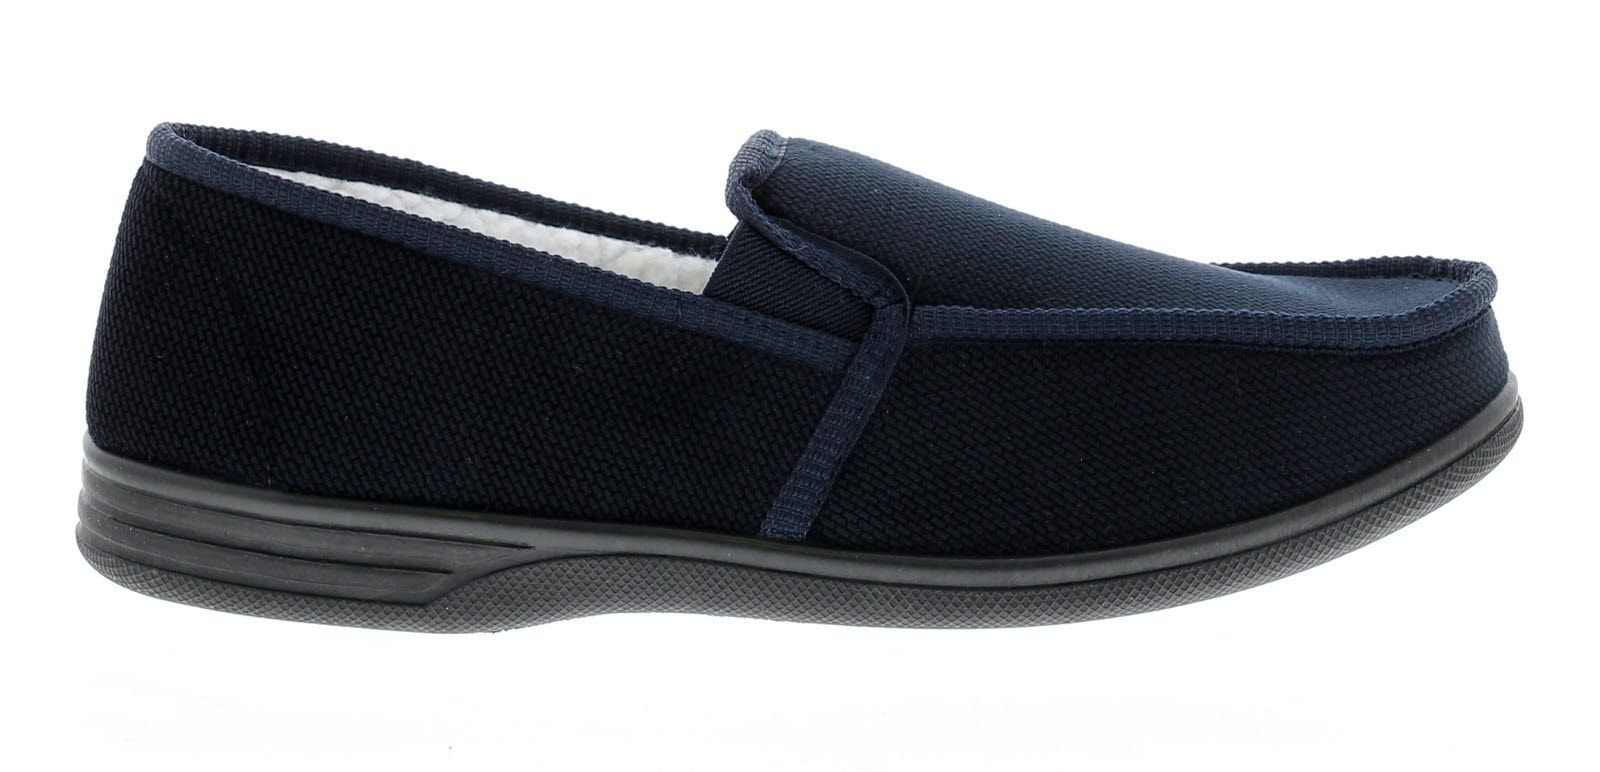 Wynsors Bernie Mens Slippers In Navy. Mens Twin Gusset Plush Slipper With Boa Fur Lining And Sock.Fabric UpperFabric LiningSynthetic SoleMens Twin Gusset Plush Slipper With Boa Fur Lining And Sock